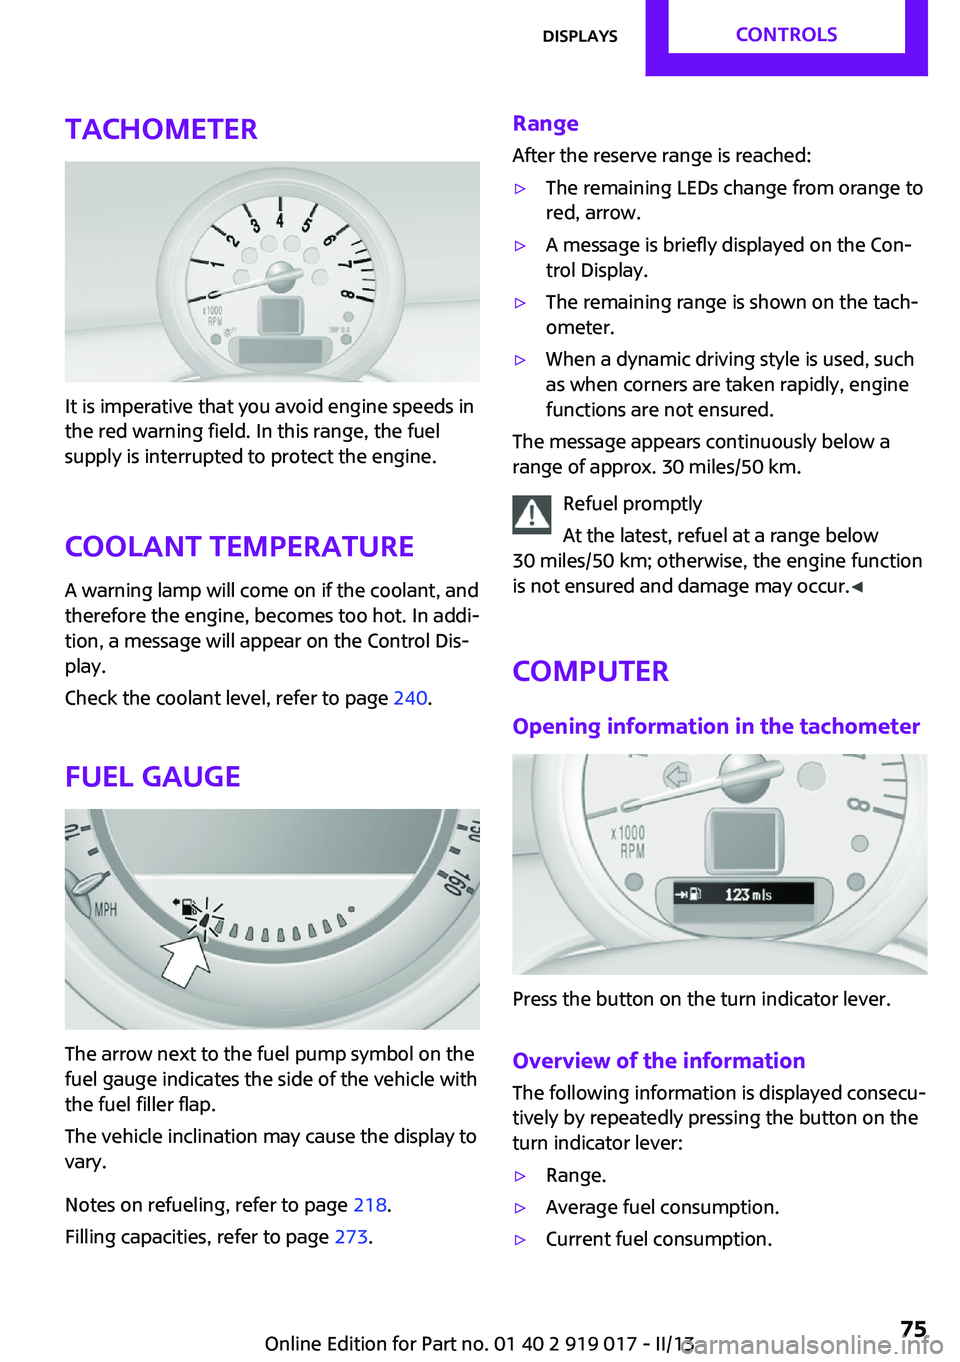 MINI COOPER CONVERTIBLE 2013  Owners Manual Tachometer
It is imperative that you avoid engine speeds in
the red warning field. In this range, the fuel
supply is interrupted to protect the engine.
Coolant temperature A warning lamp will come on 